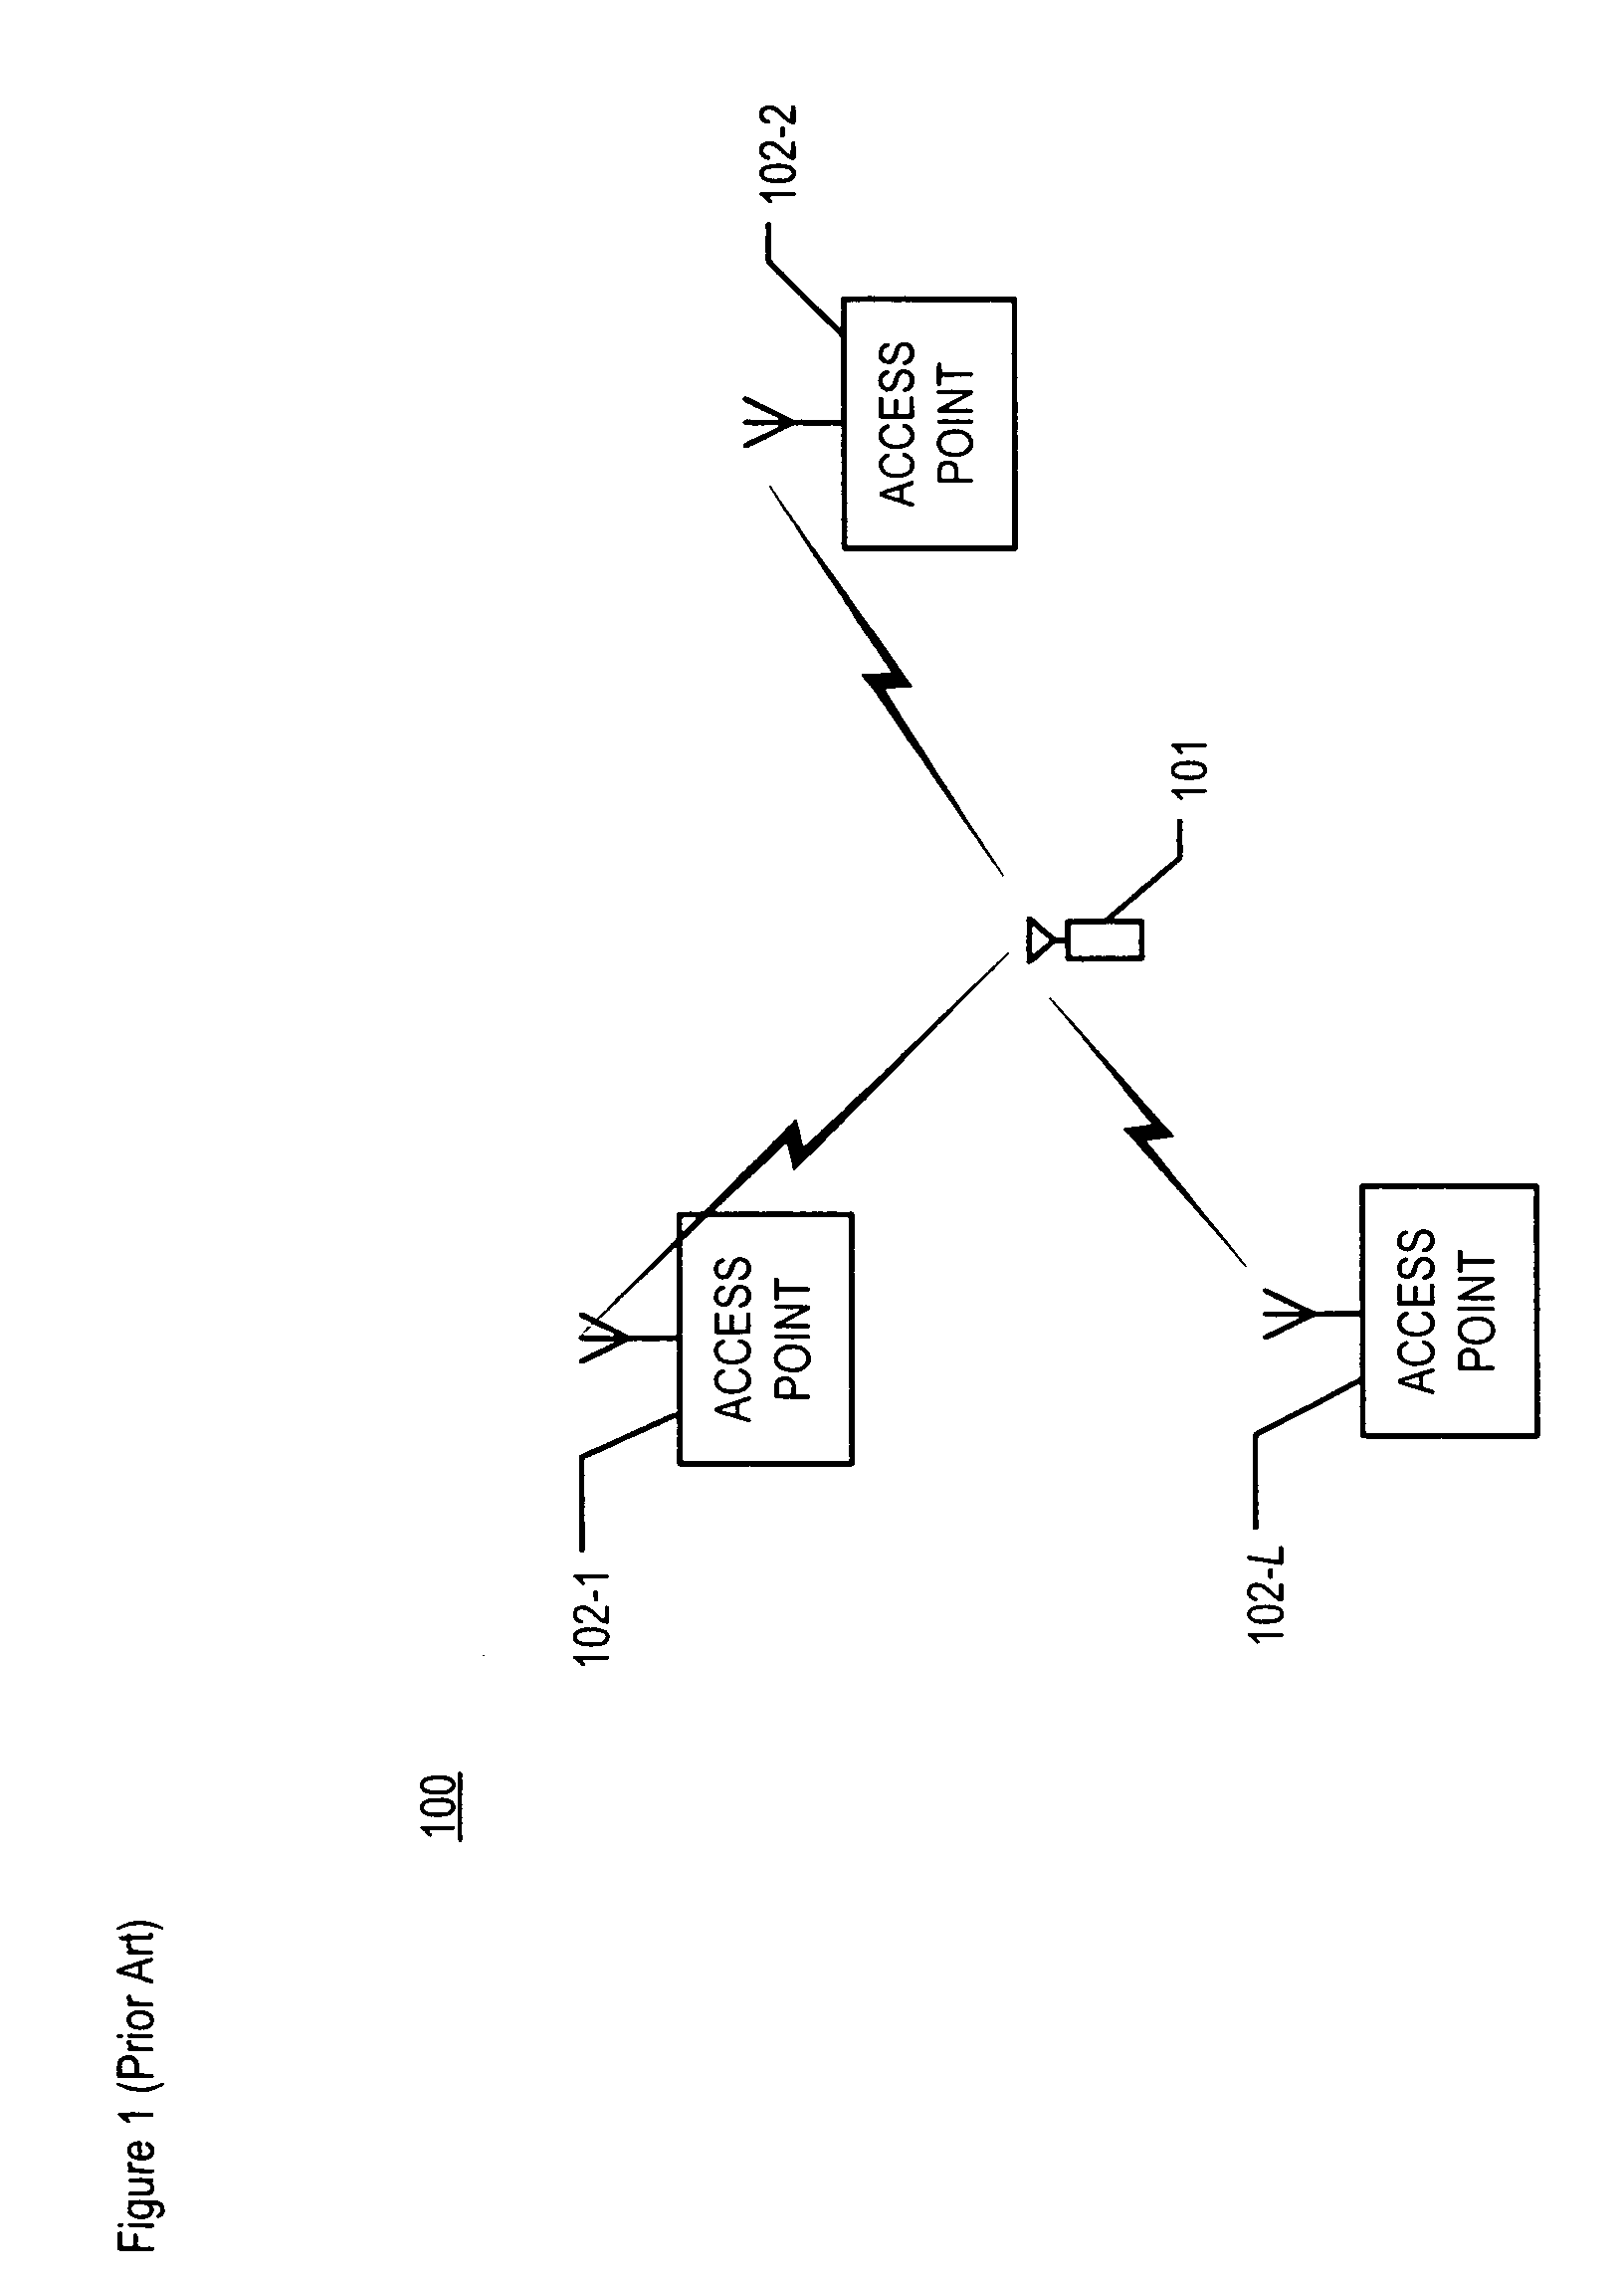 Location estimation of wireless terminals in a multi-story environment